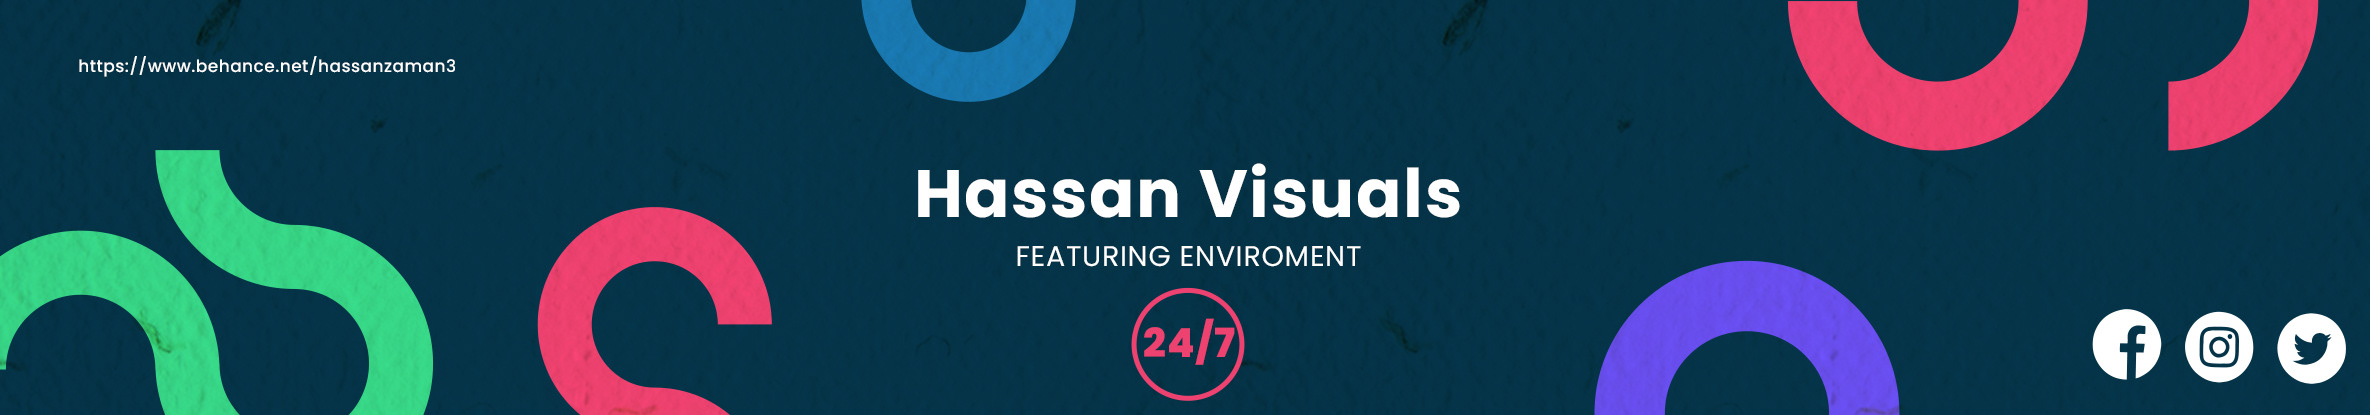 Hassan Visuals's profile banner